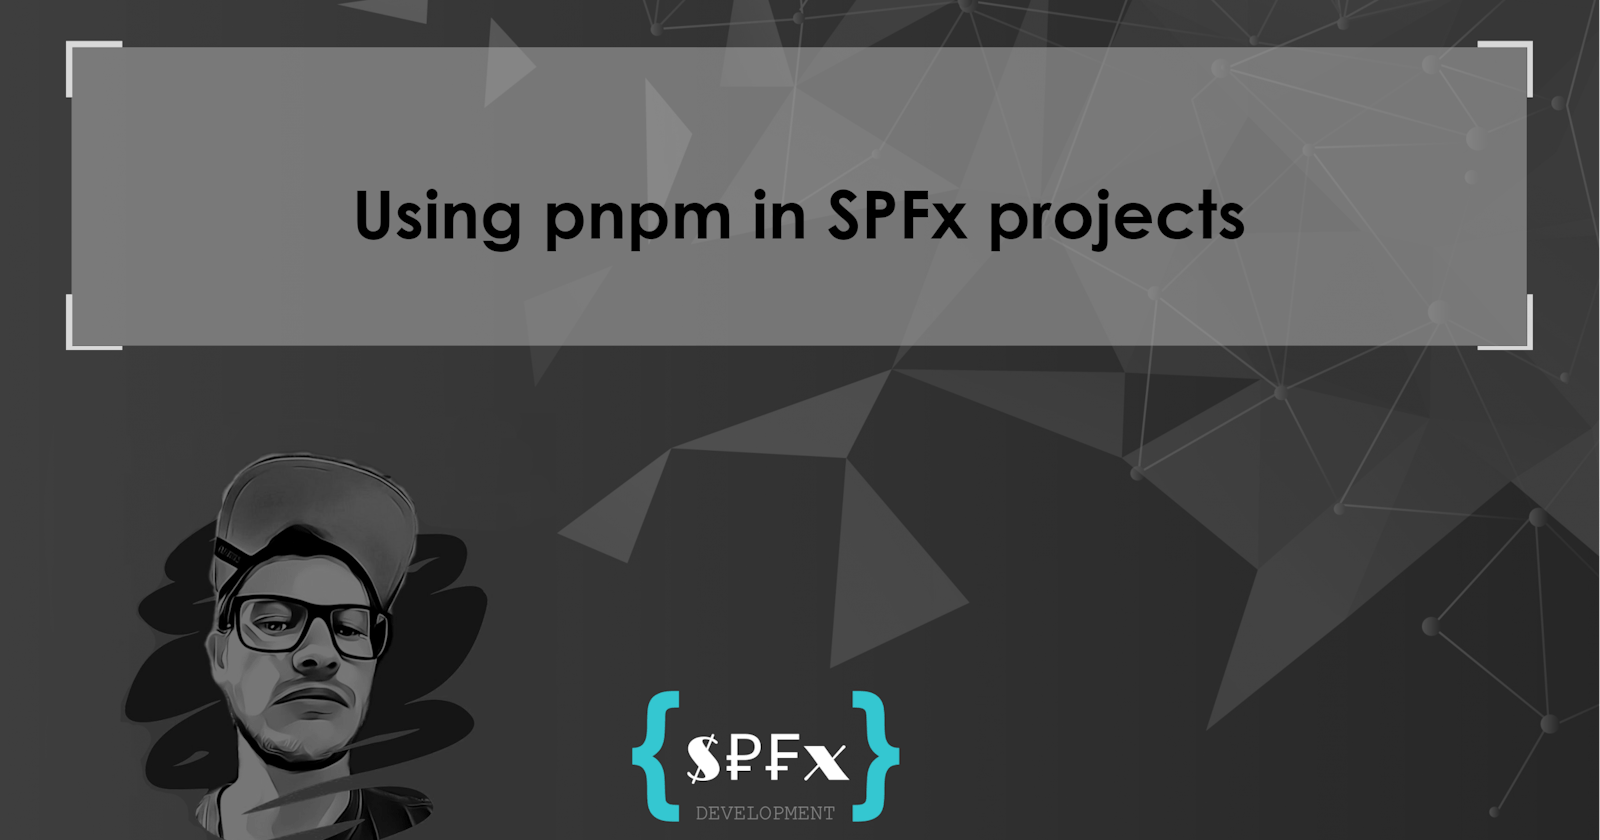 Using pnpm in SPFx projects